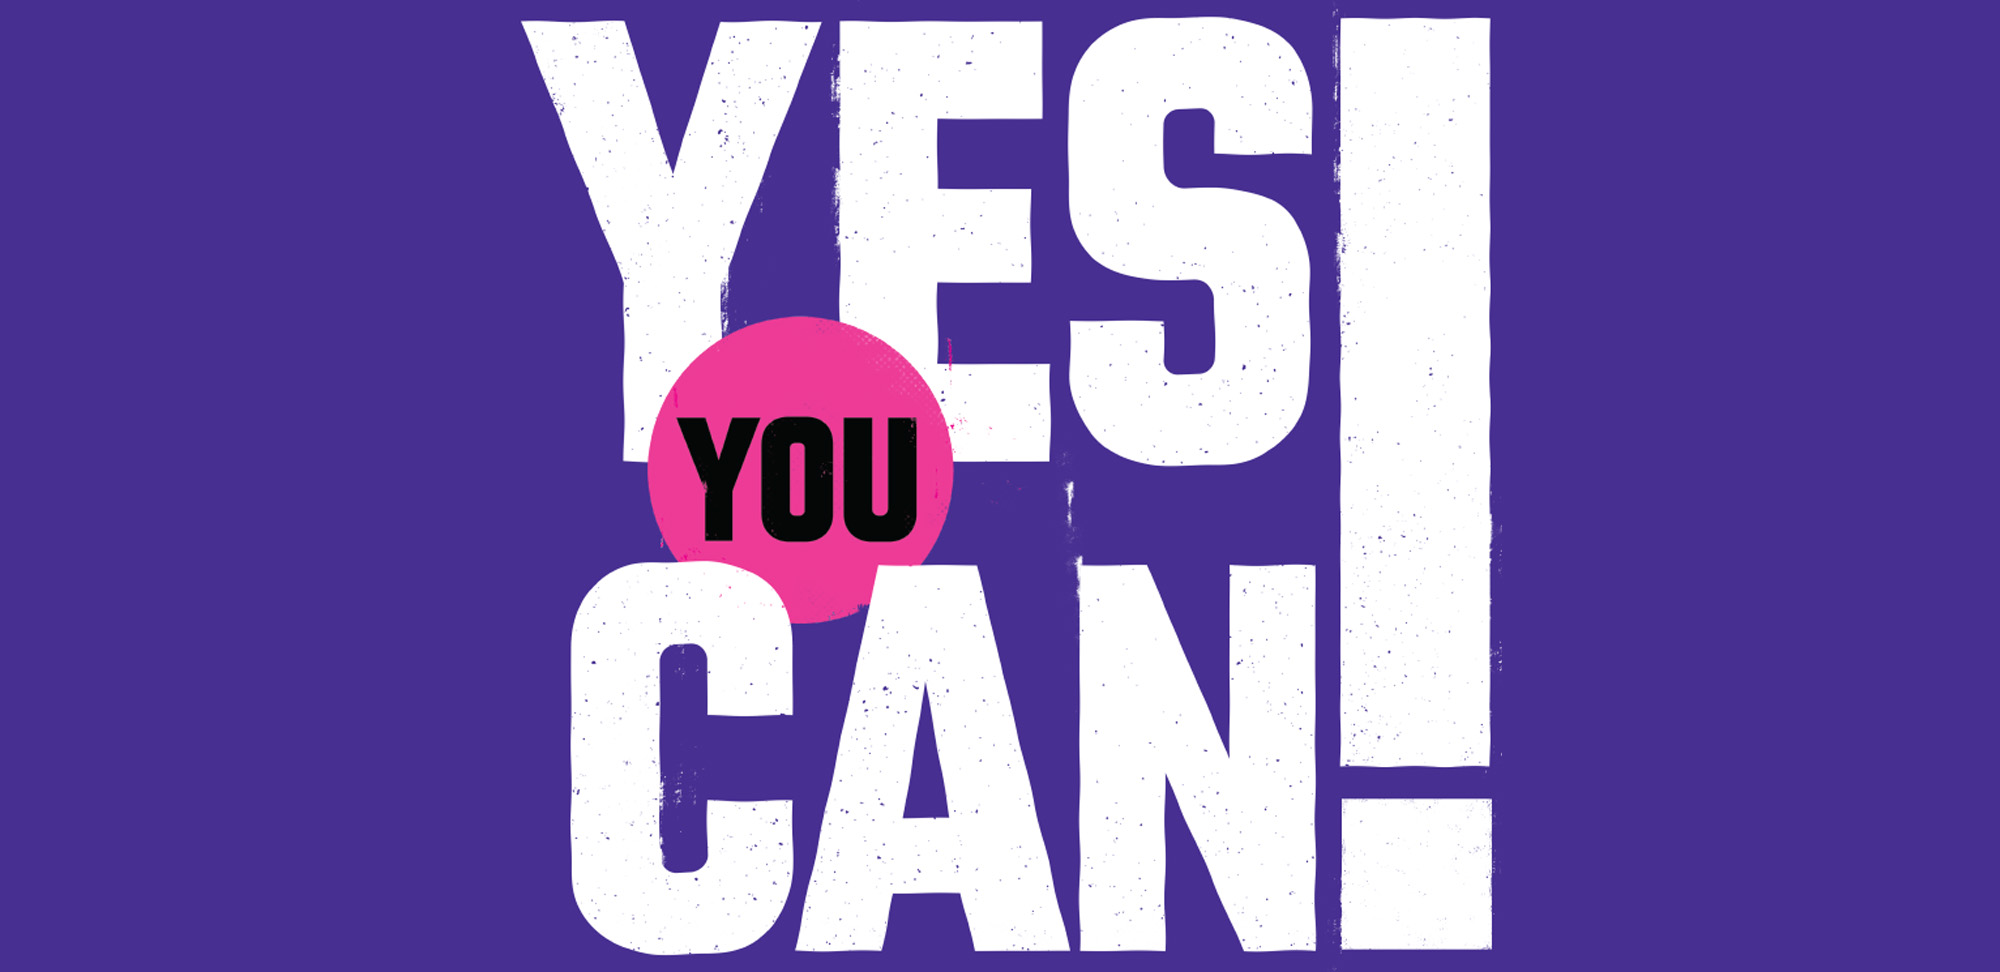 Typographic illustration 'Yes You Can!'